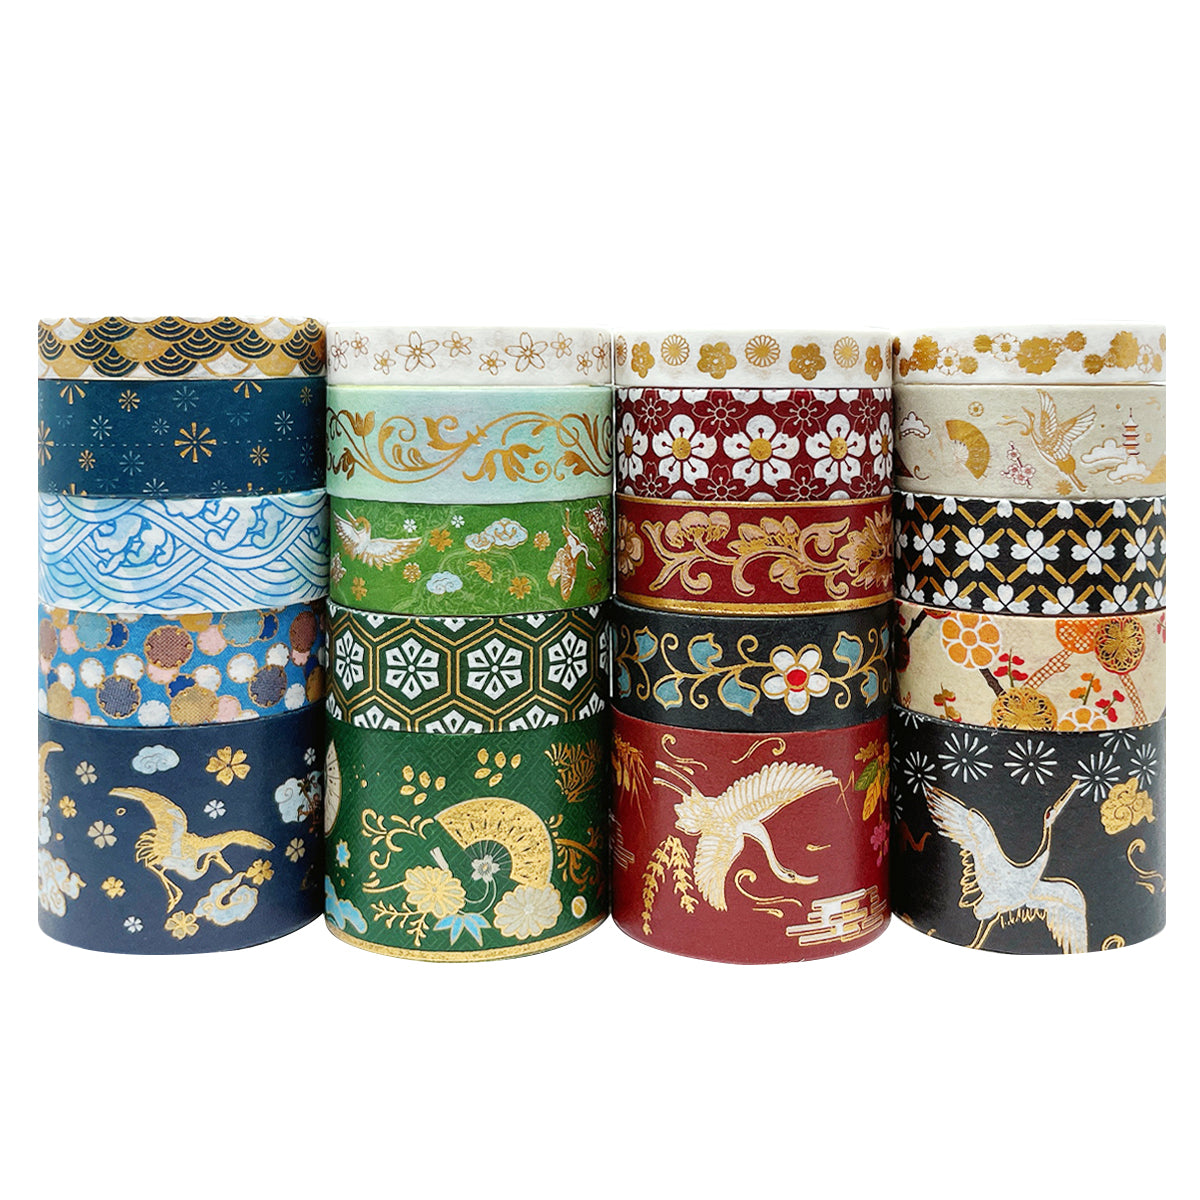 Wrapables Decorative Gold Foil Washi Tape Box Set for Arts & Crafts,  Scrapbooking, Stationery, Diary (10 Rolls), Artwork 